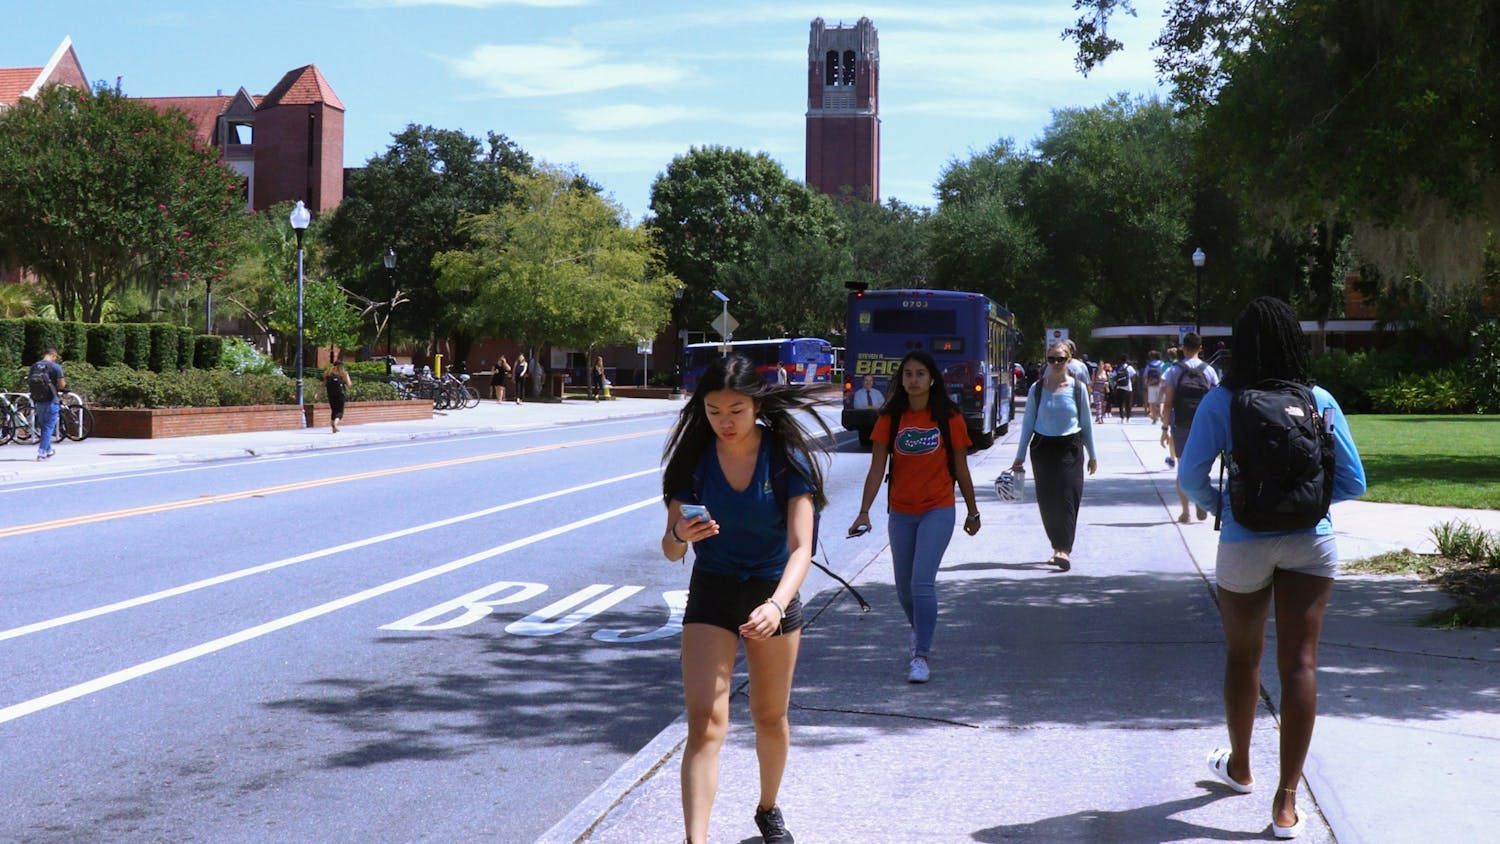 University of Florida students rush to and from class along Stadium Road prior to the pandemic, on September 17, 2019. The upcoming fall semester will see tens of thousands of students return to campus, although an increase in the number of delta variant COVID-19 infections raises concerns about viral spread among unvaccinated people.